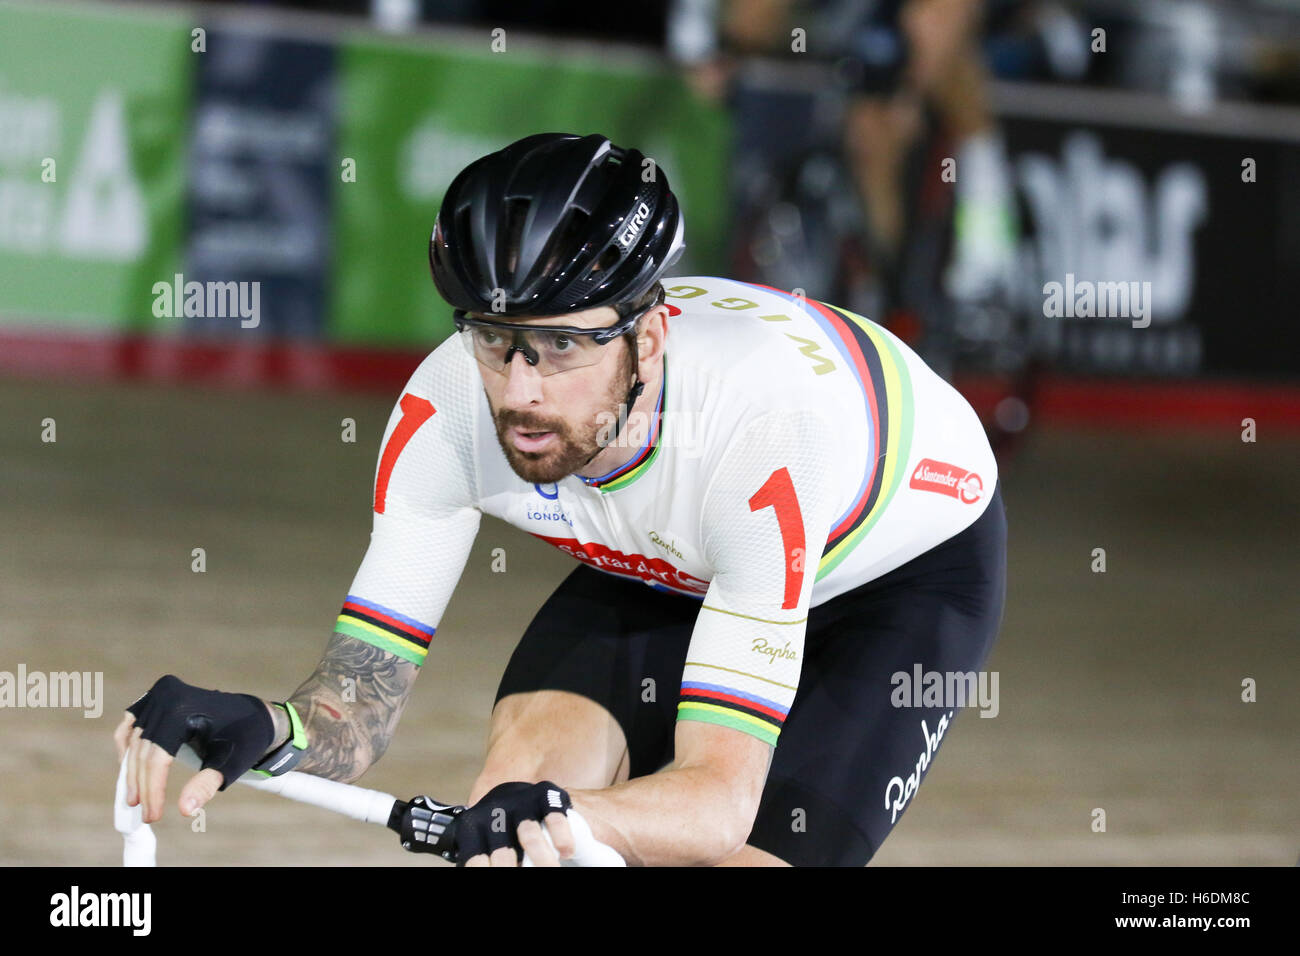 London, UK. 27th Oct, 2016. Bradley Wiggins. Cyclists compete in the third day of the London Six Day cycling event. Lee Valley Velodrome, Olympic Park, London, UK. Copyright Credit:  carol moir/Alamy Live News Stock Photo